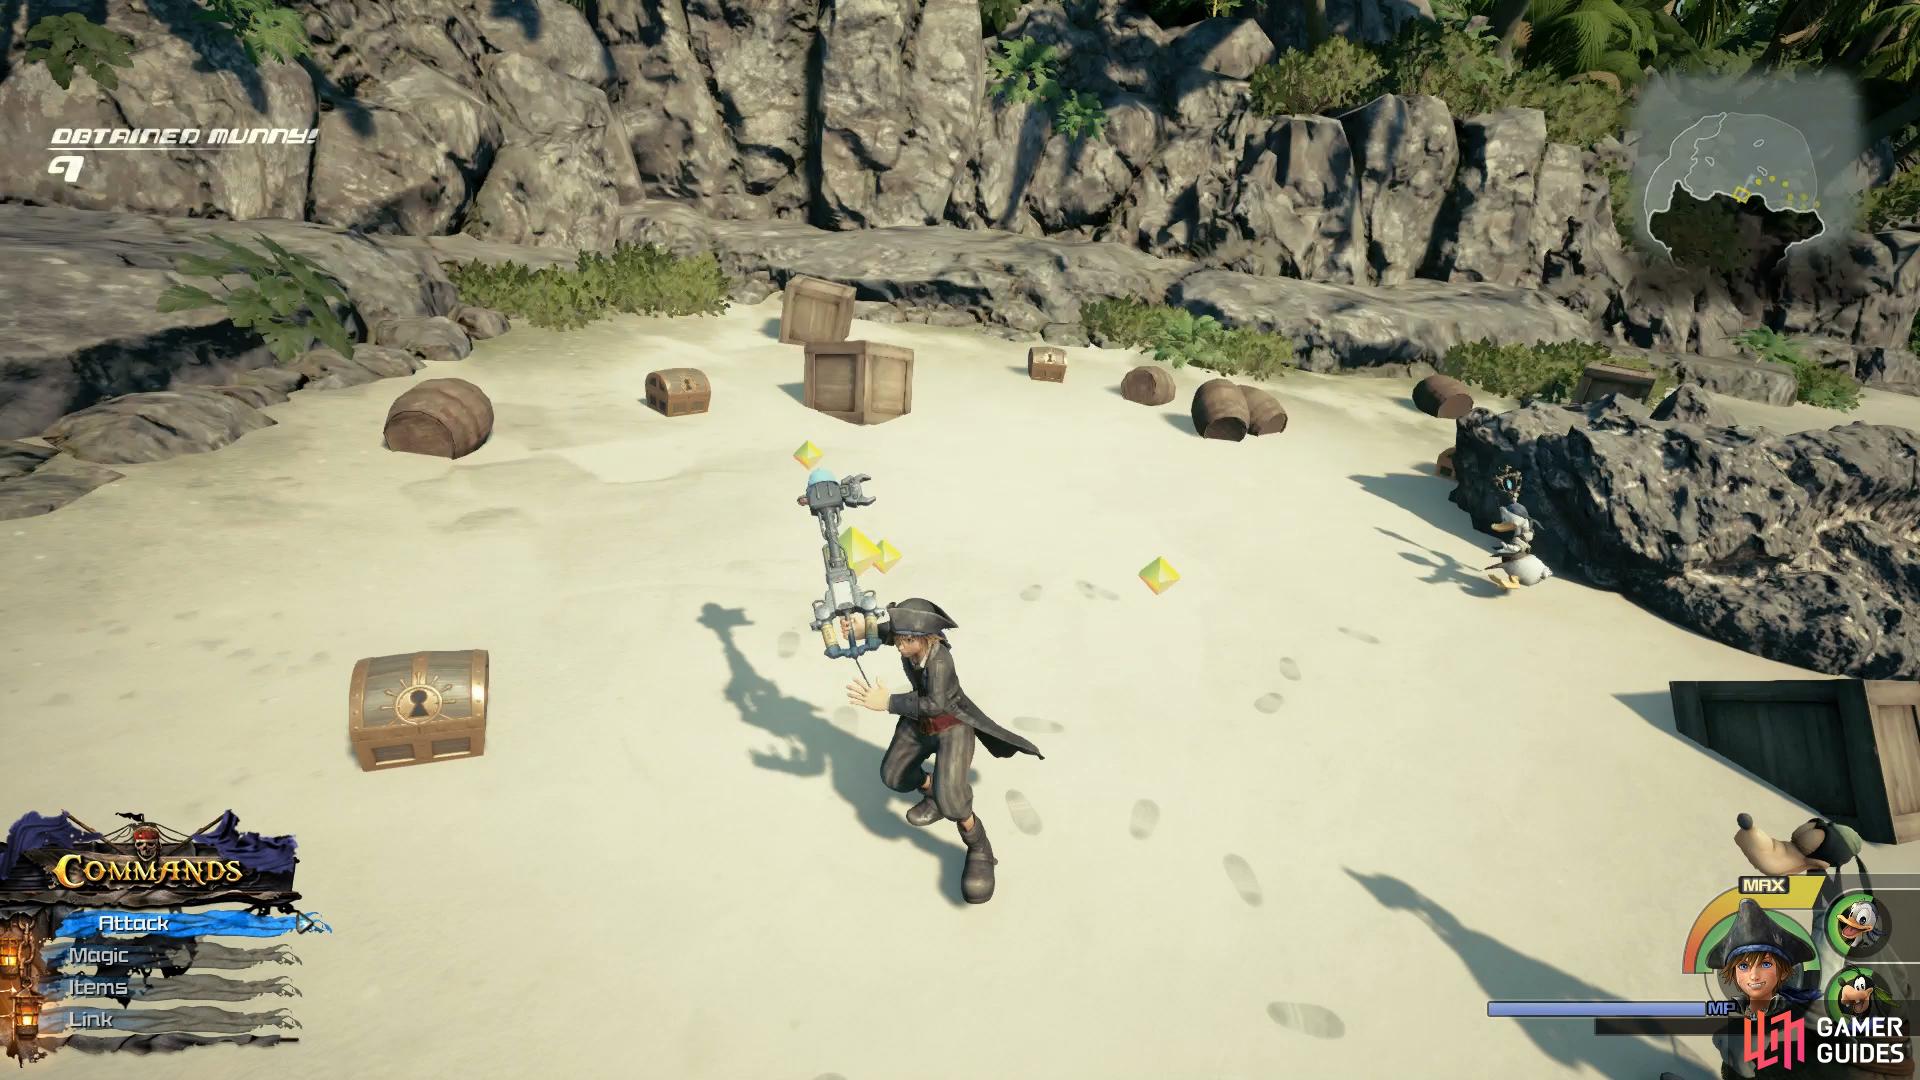 Loot these chests after defeating the Heartless first.